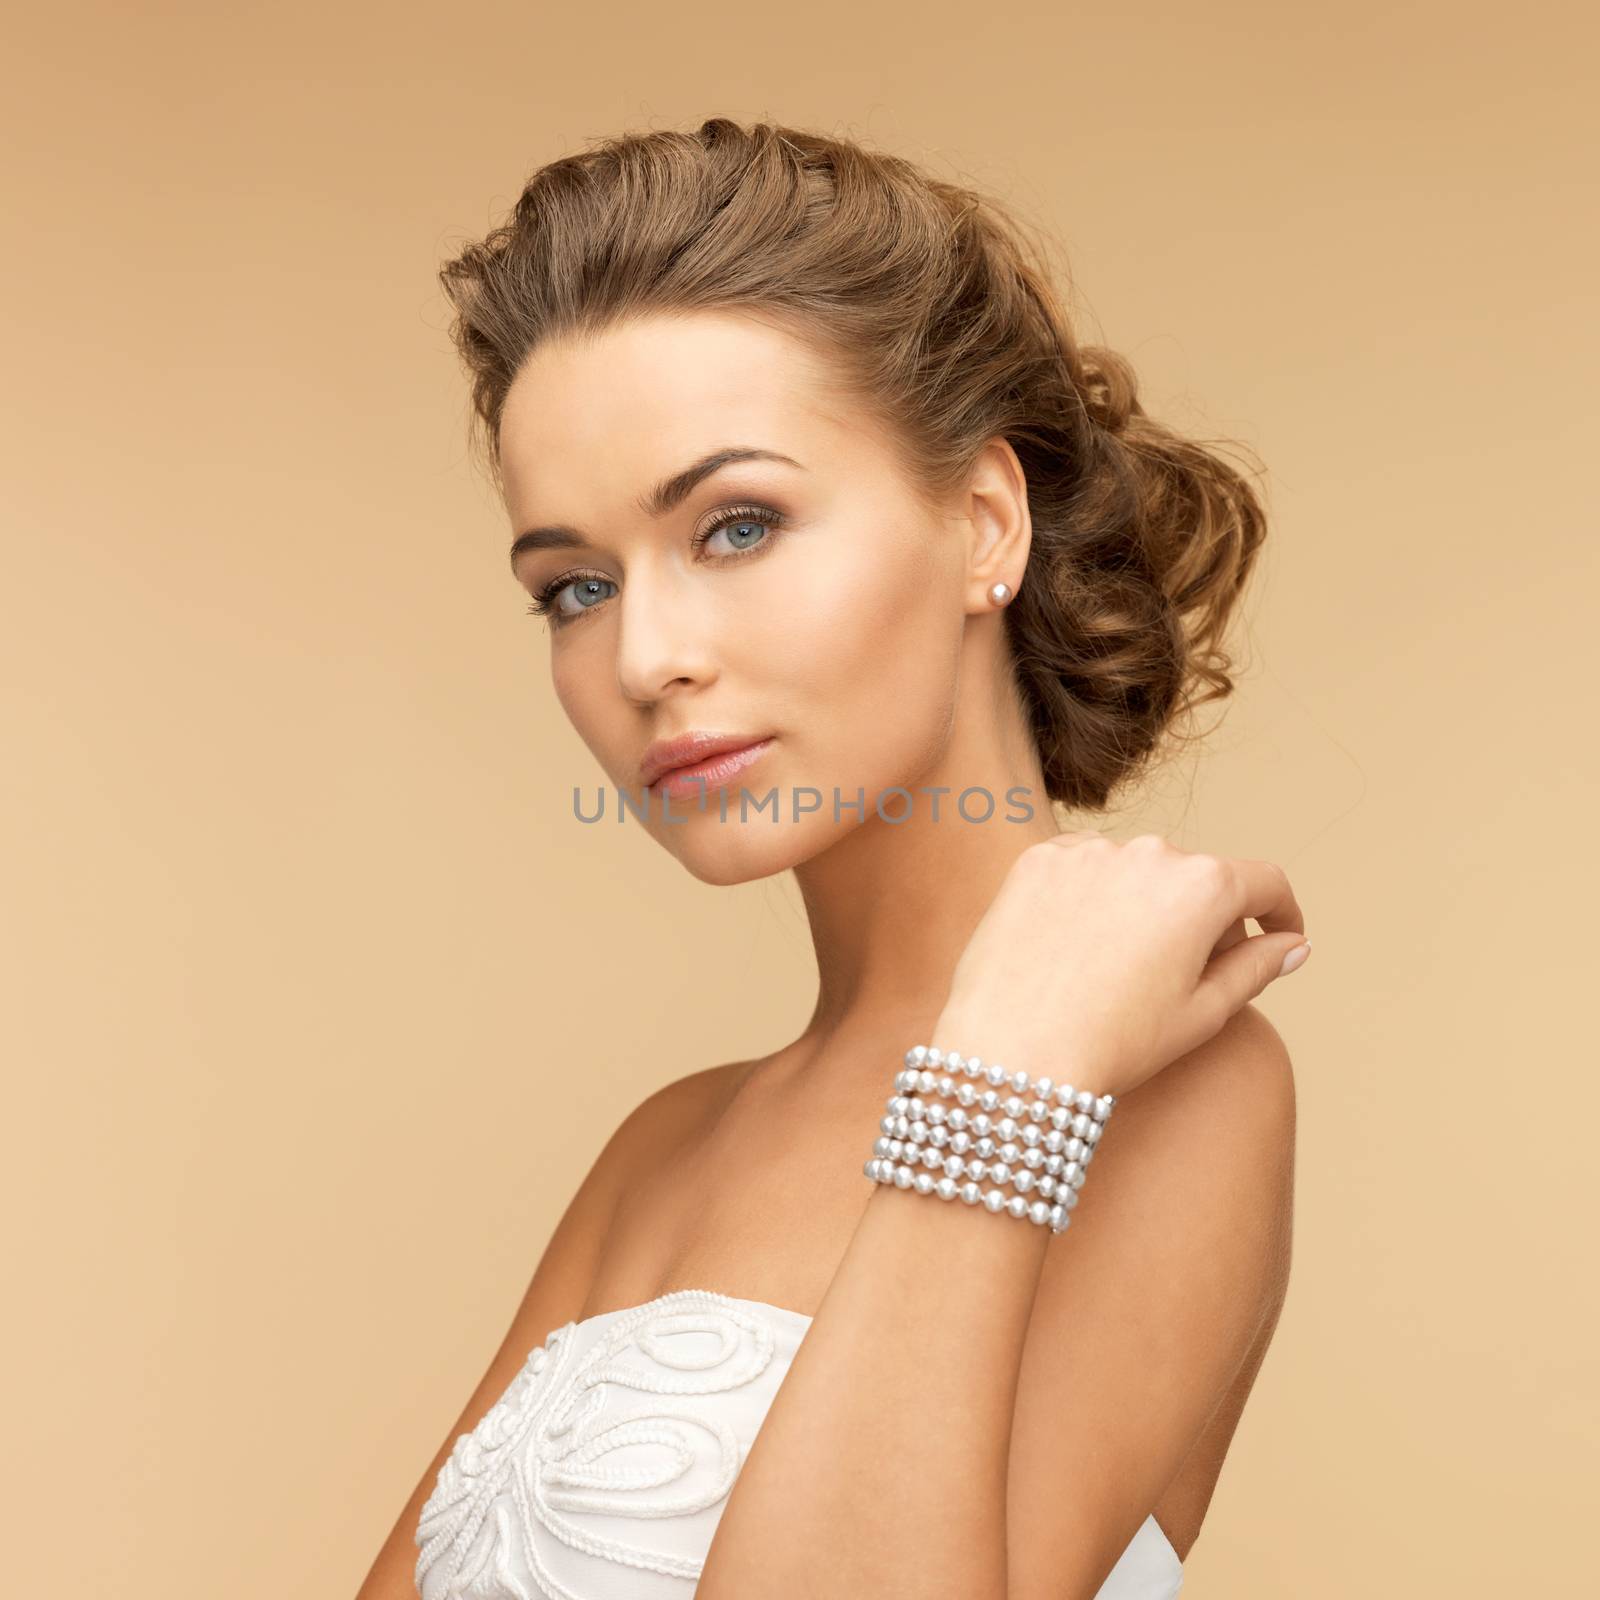 woman with pearl earrings and bracelet by dolgachov